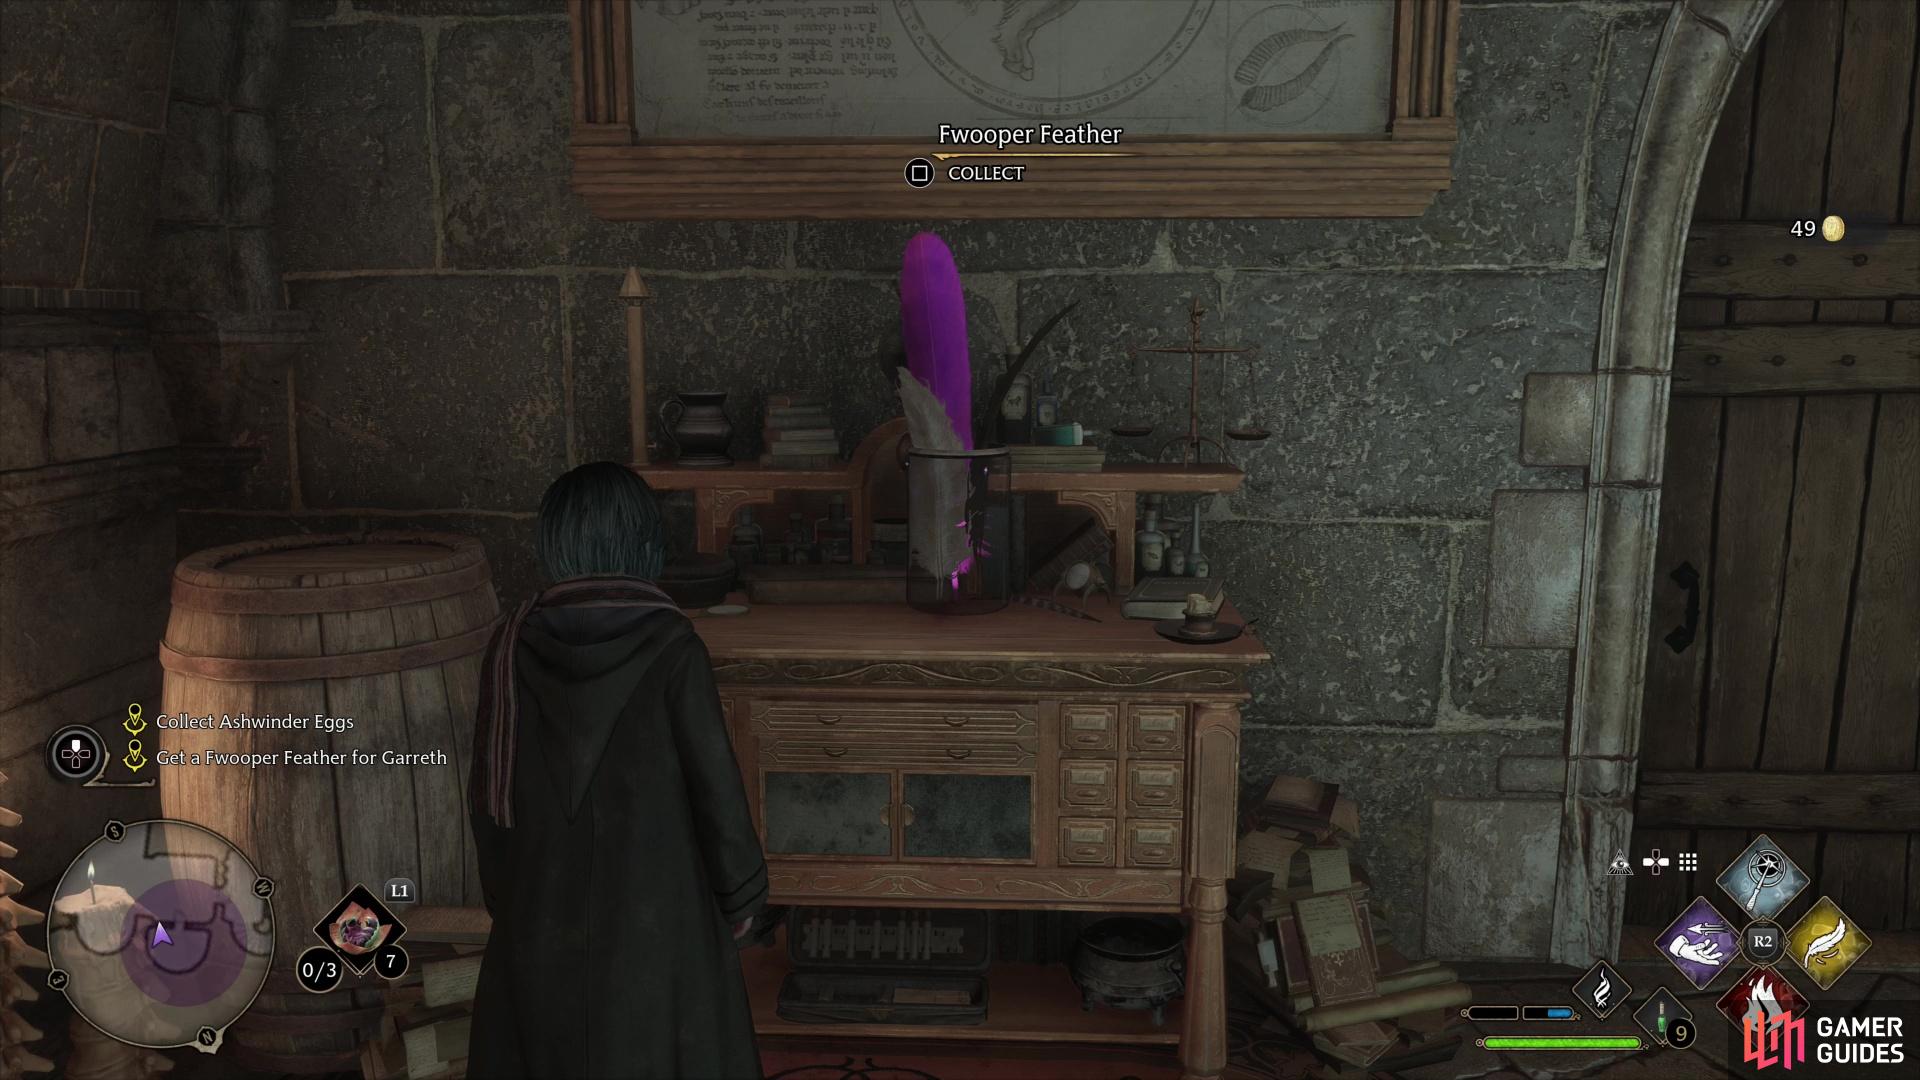 If you agree, you'll find the large, purple feather in Professor Sharp's office.